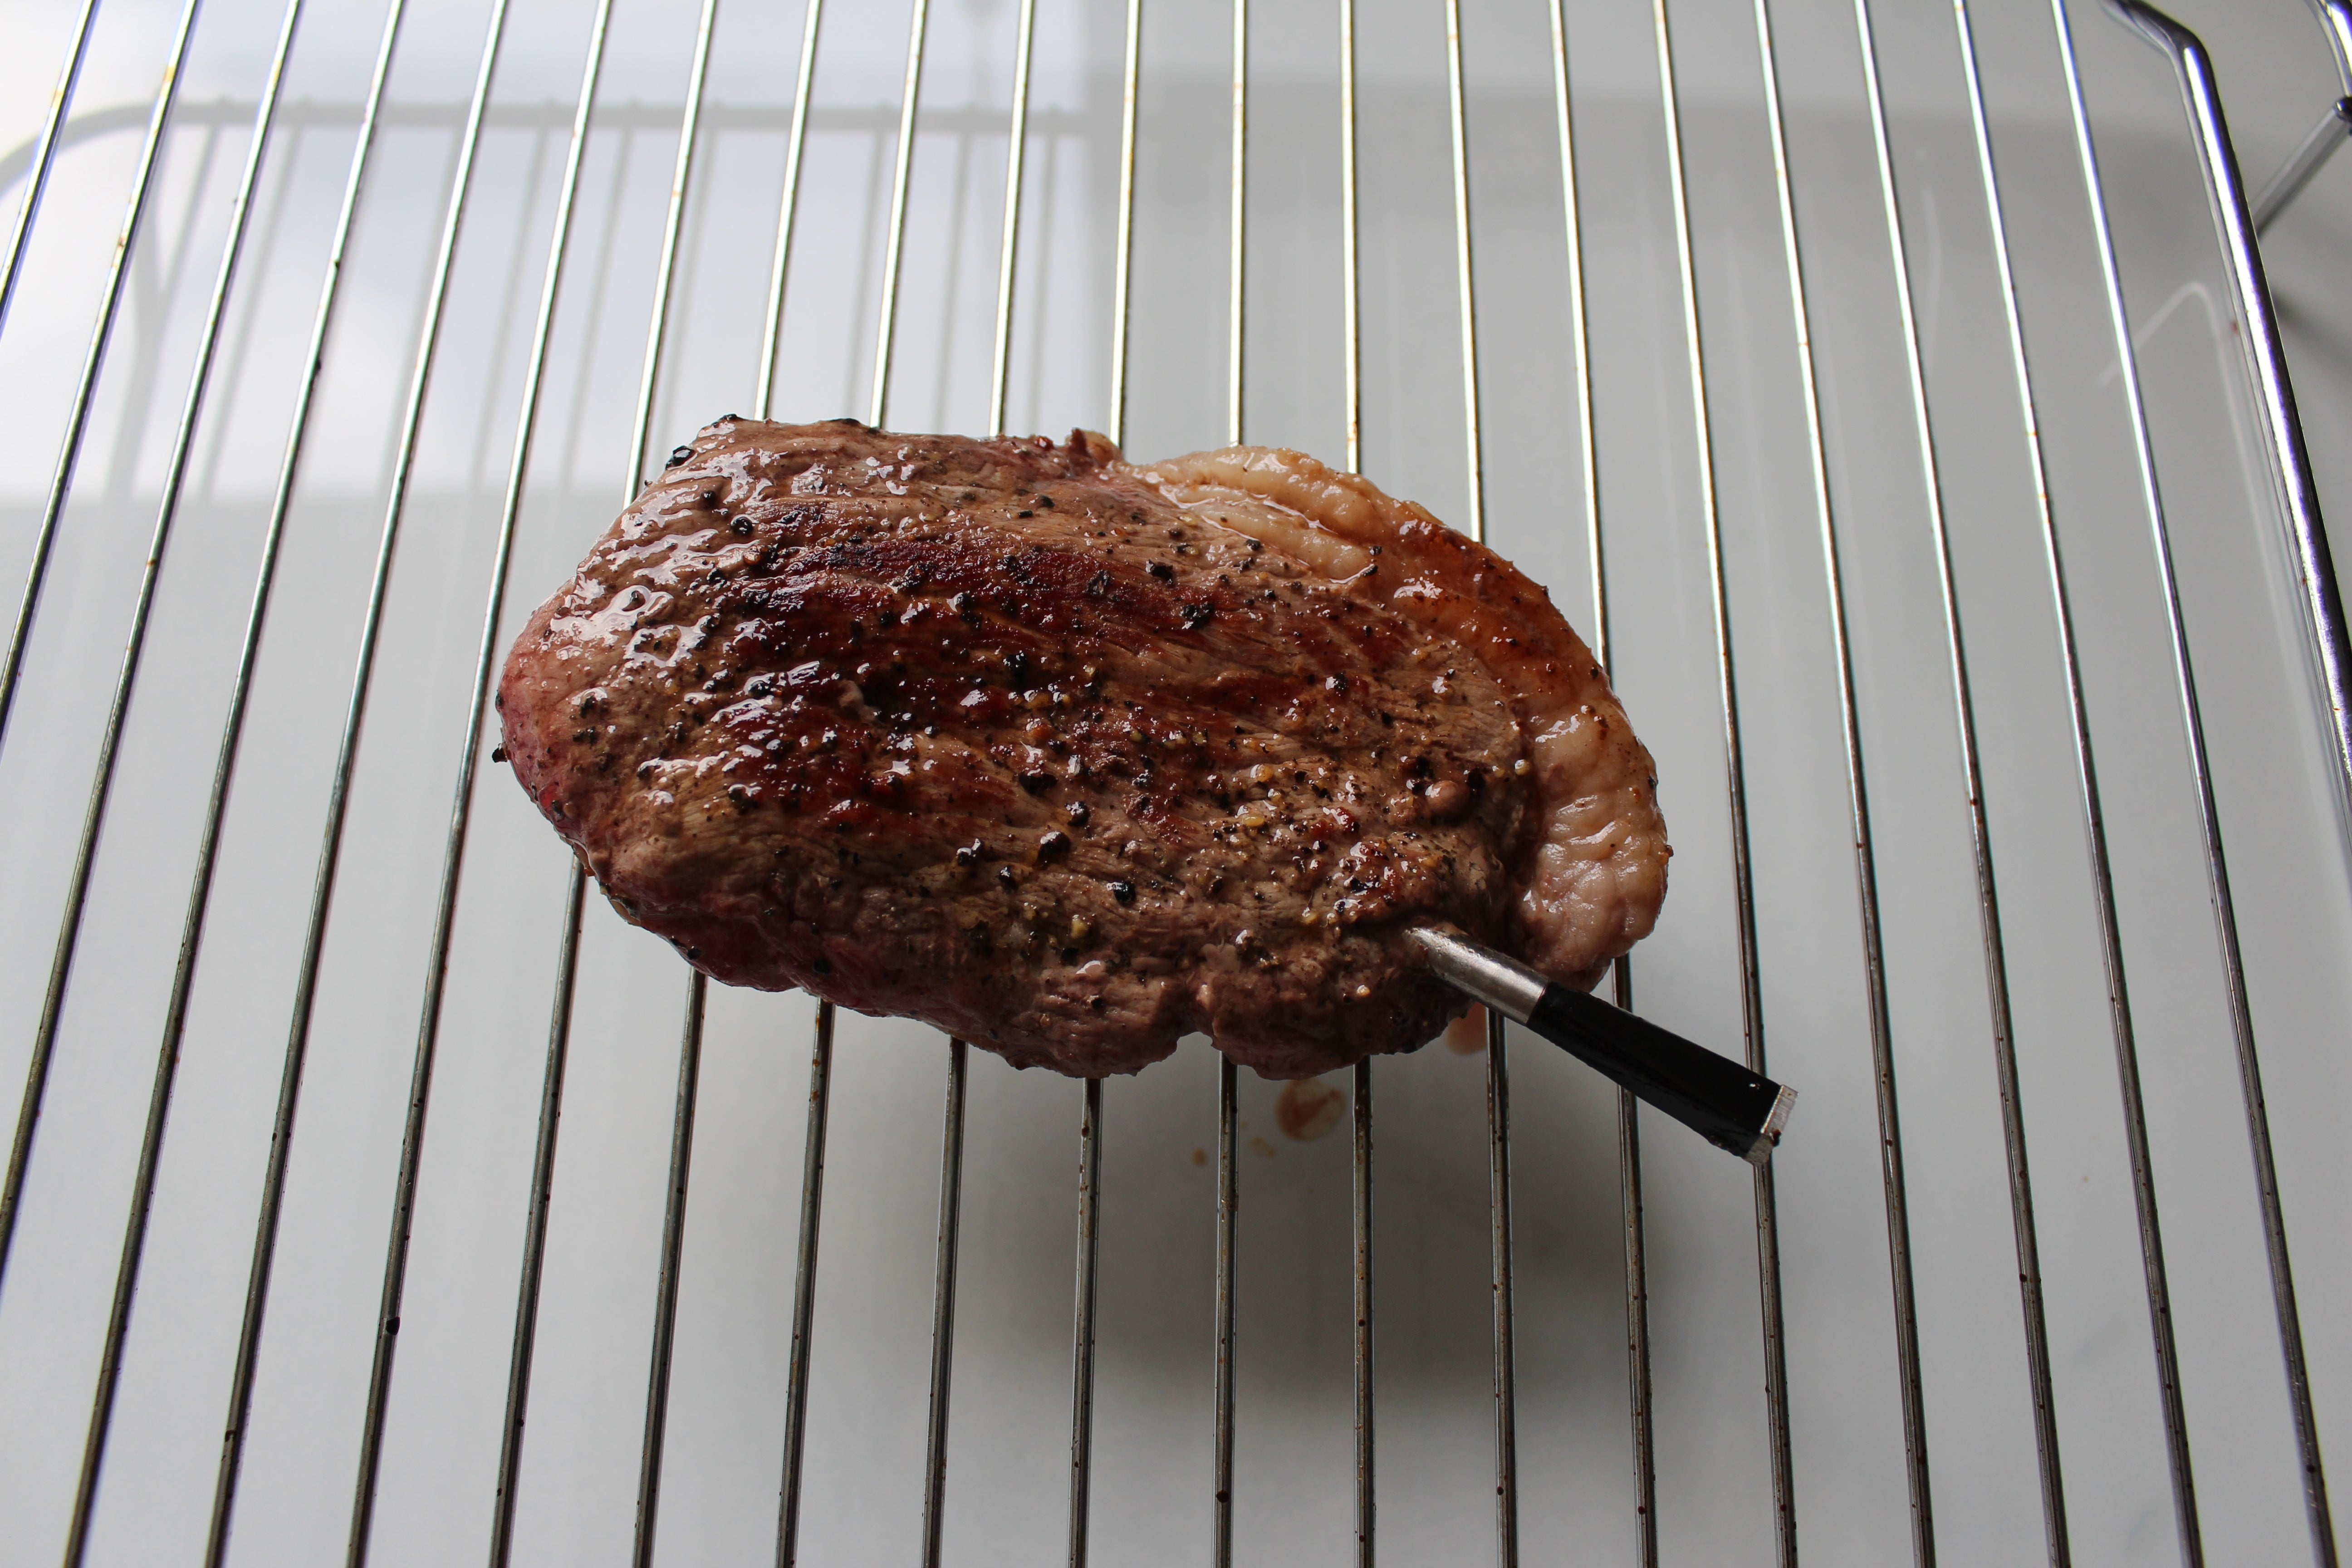 Grilled steak with Meater Probe thermometer inserted.